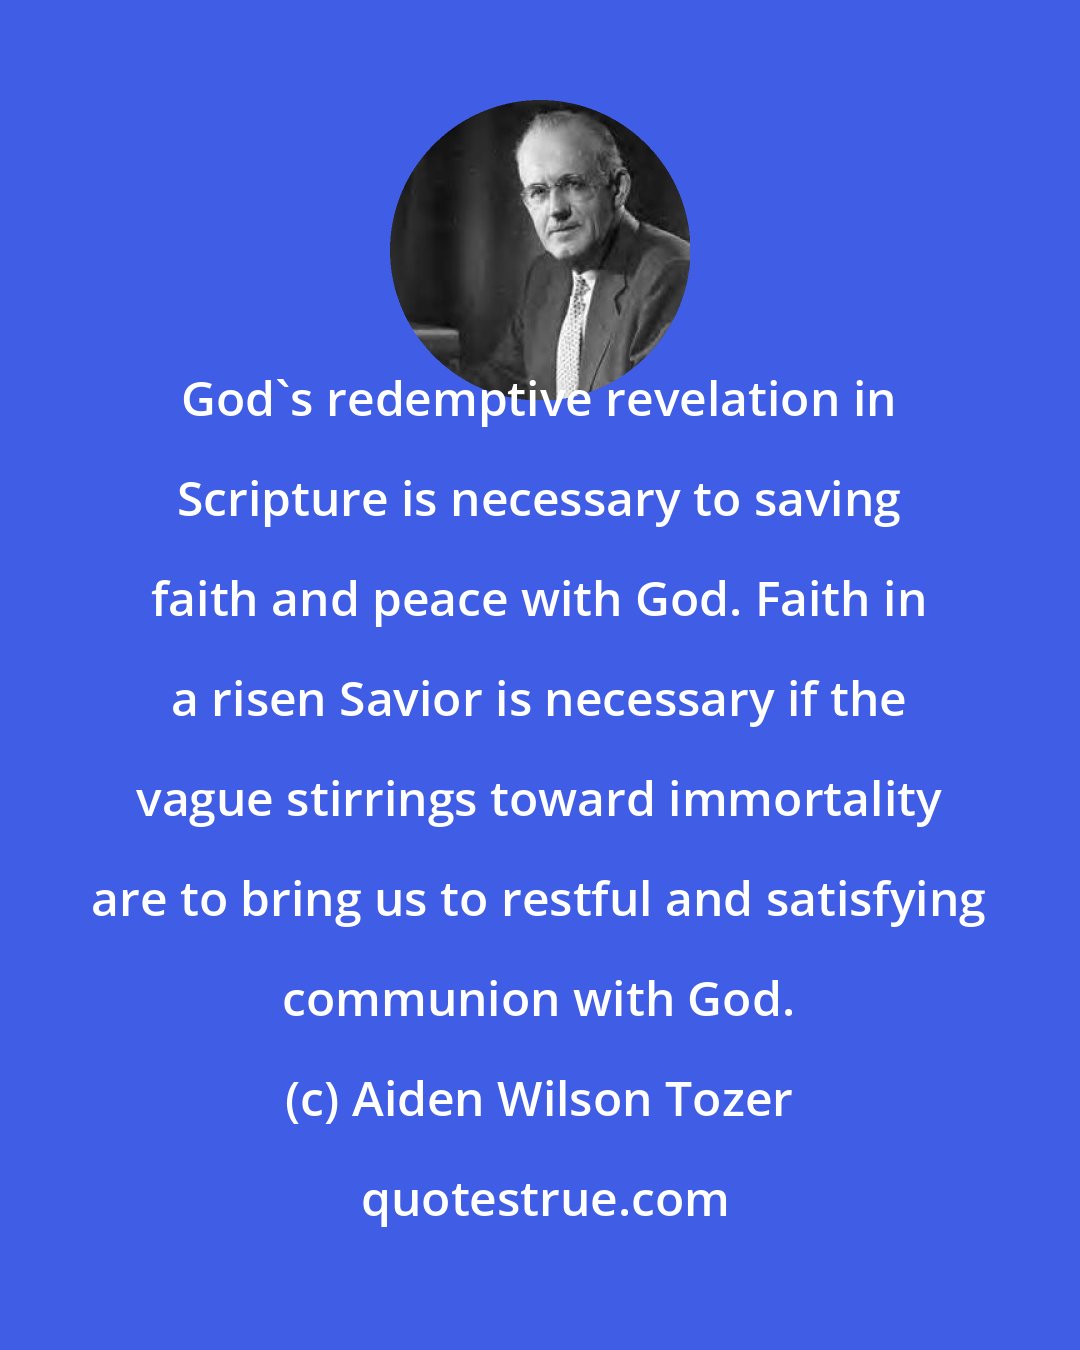 Aiden Wilson Tozer: God's redemptive revelation in Scripture is necessary to saving faith and peace with God. Faith in a risen Savior is necessary if the vague stirrings toward immortality are to bring us to restful and satisfying communion with God.